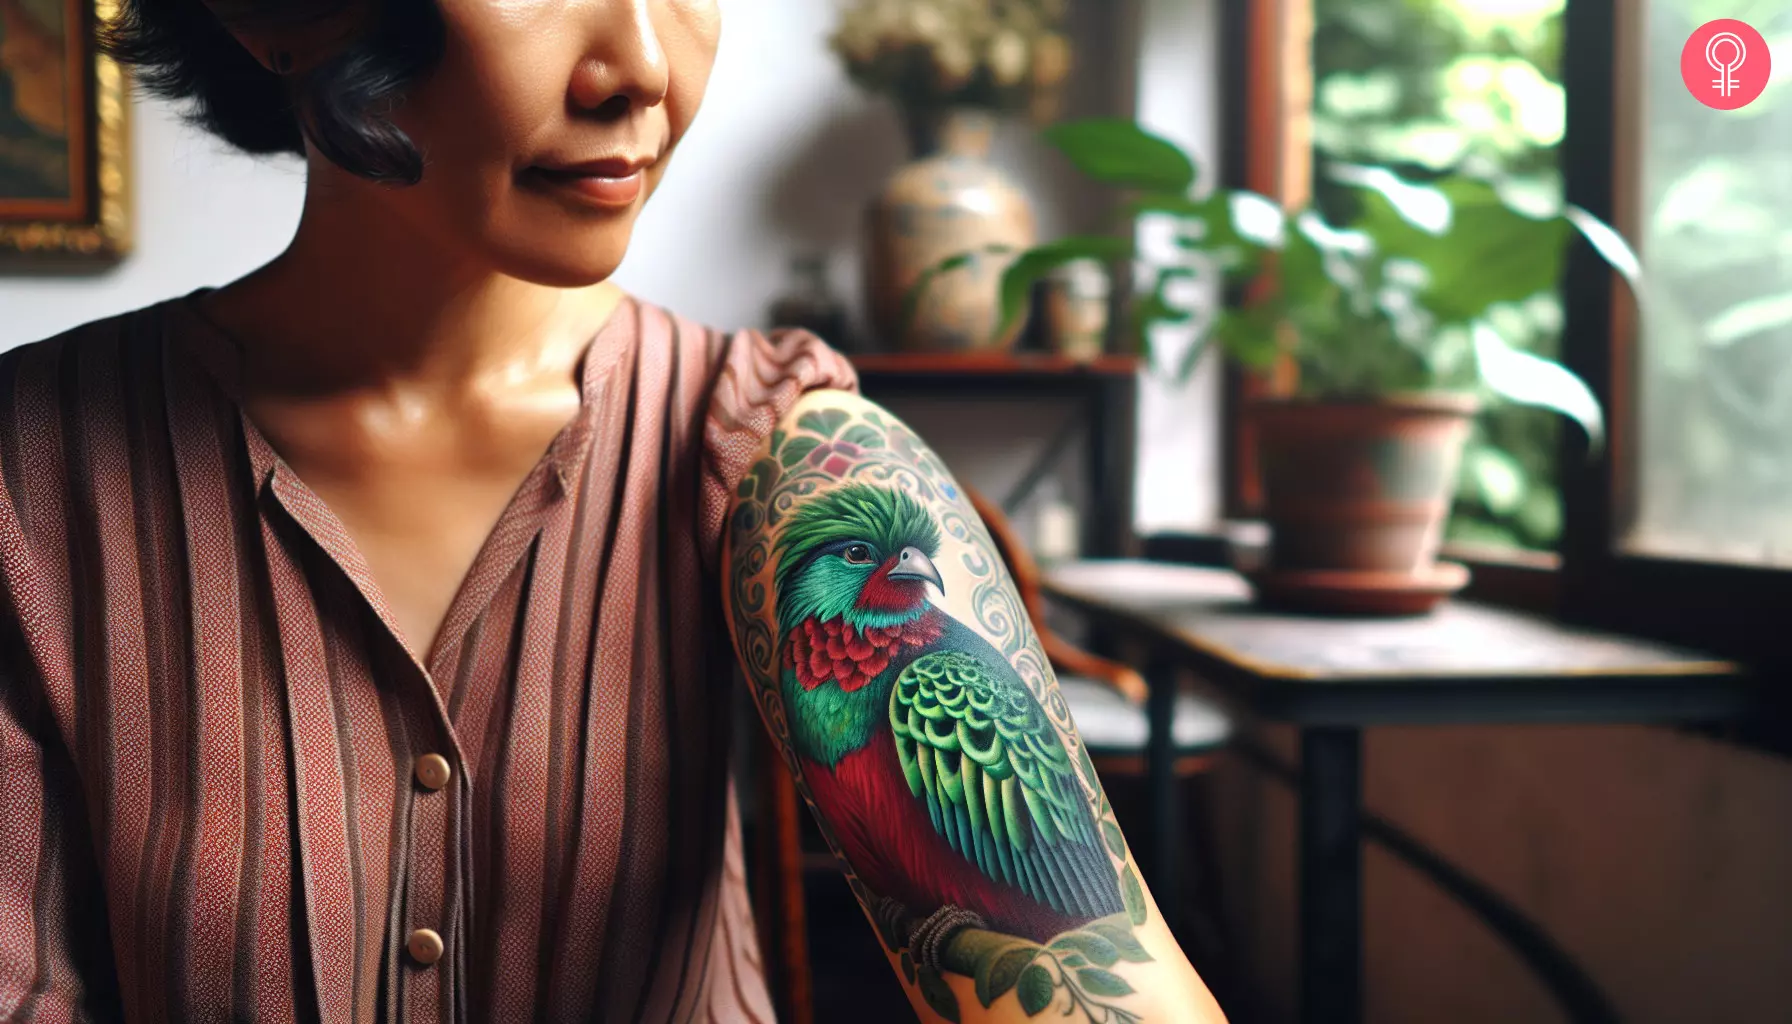 Quetzal bird tattoo on the arm of a woman